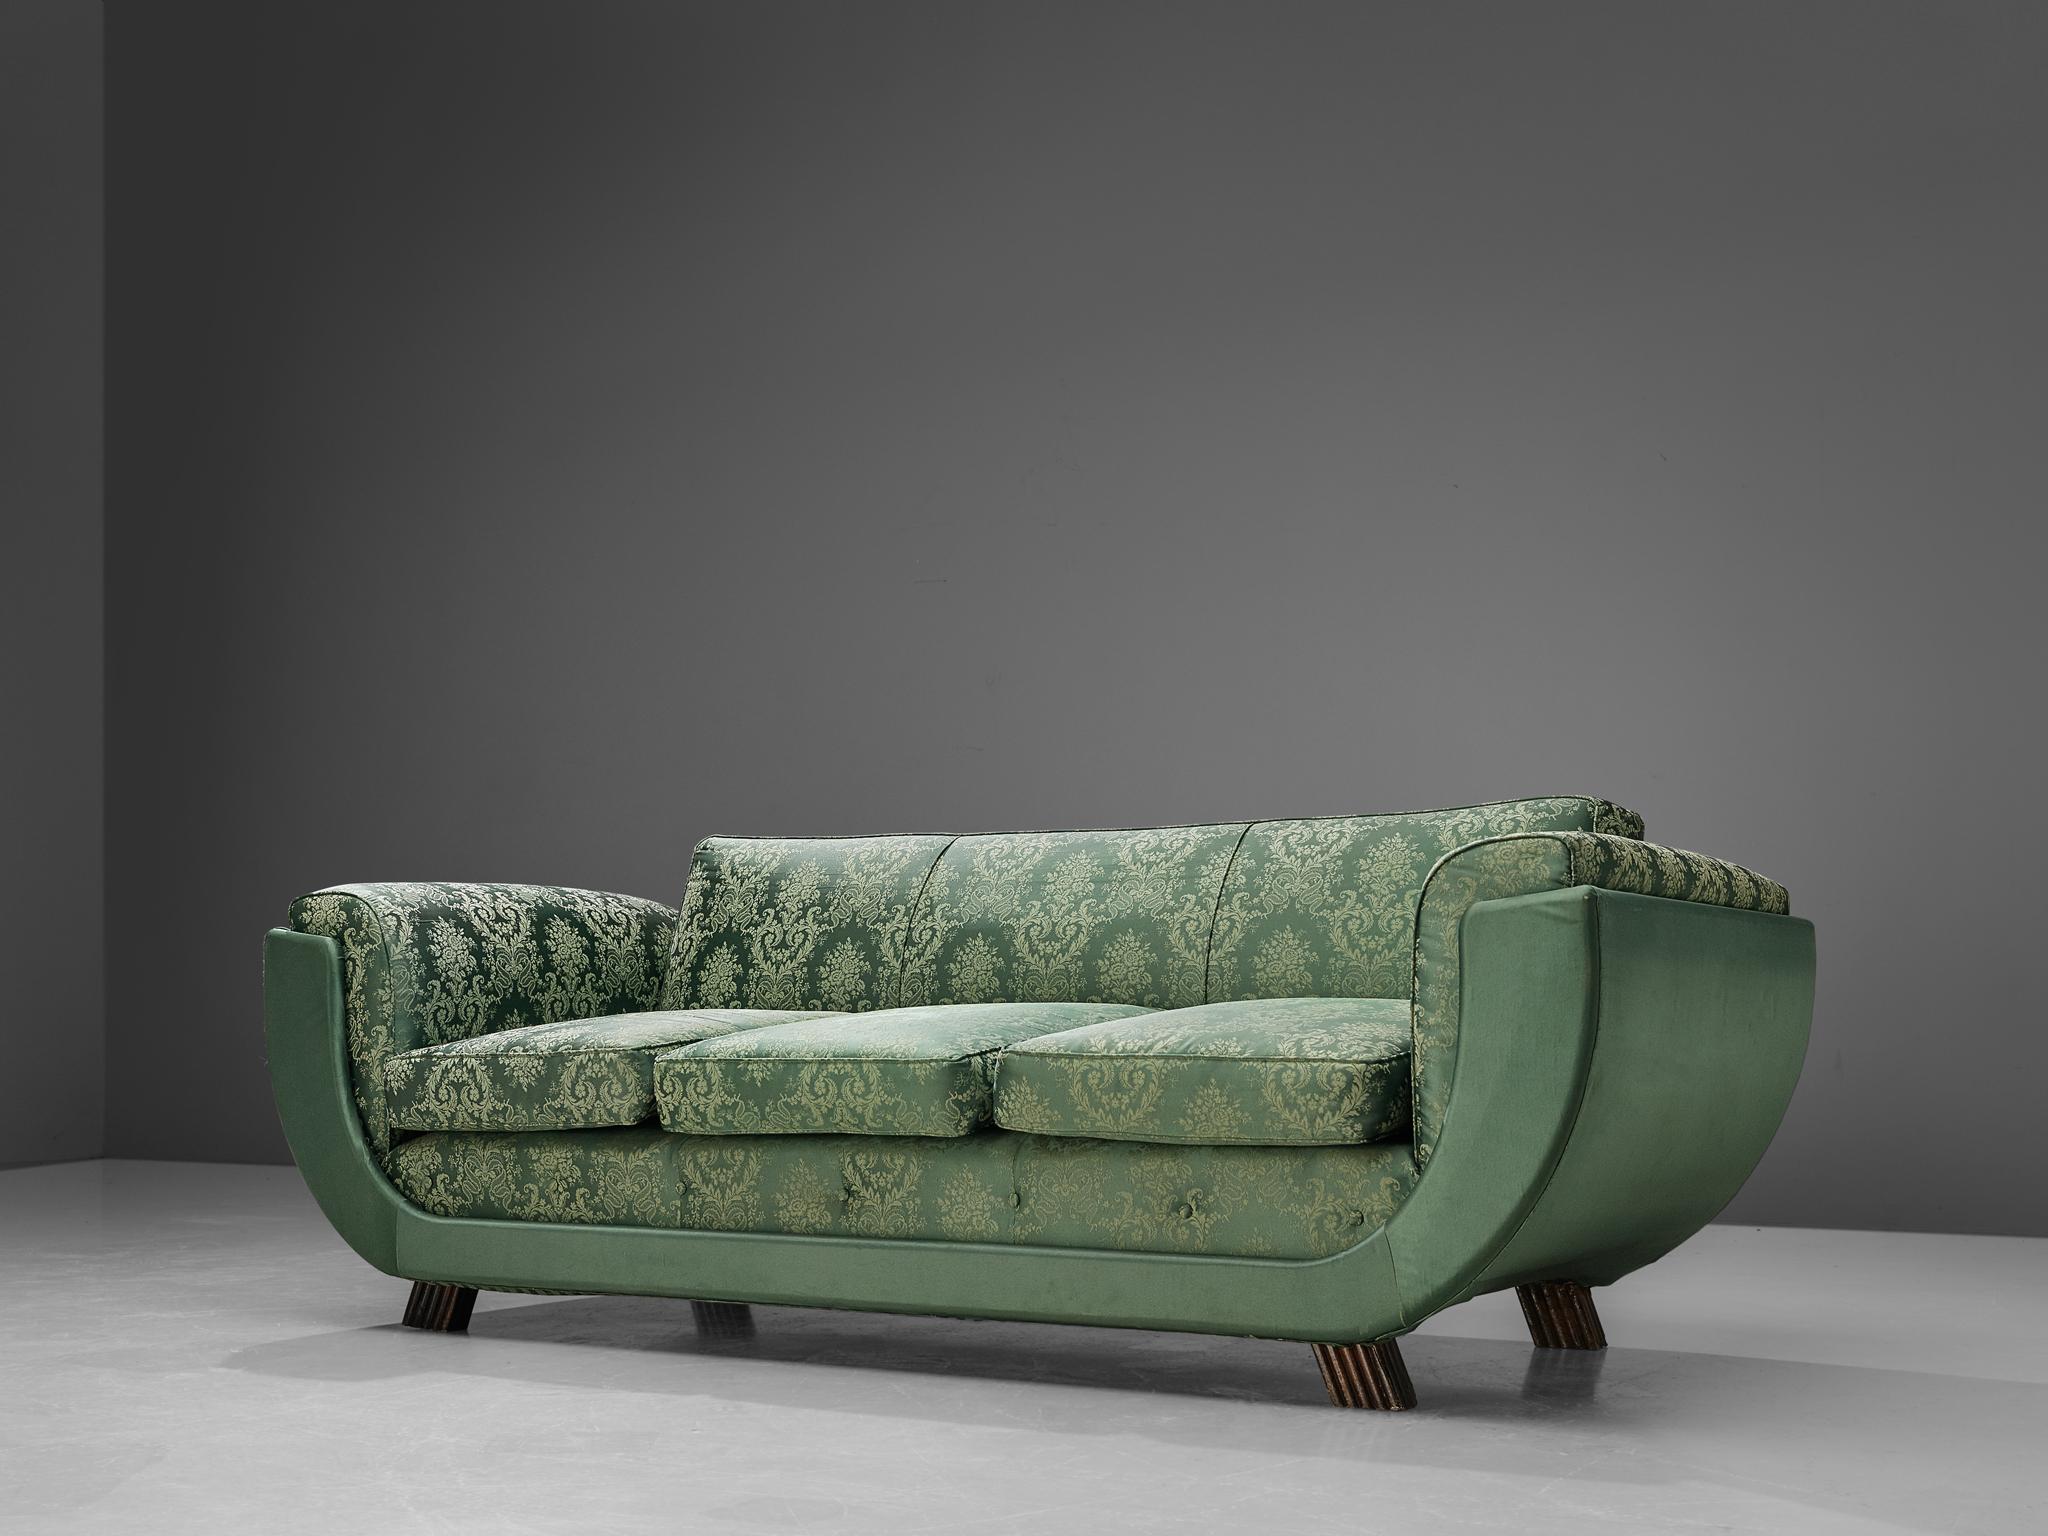 Italian Art Deco Sofa in Floral Patterned Upholstery 1